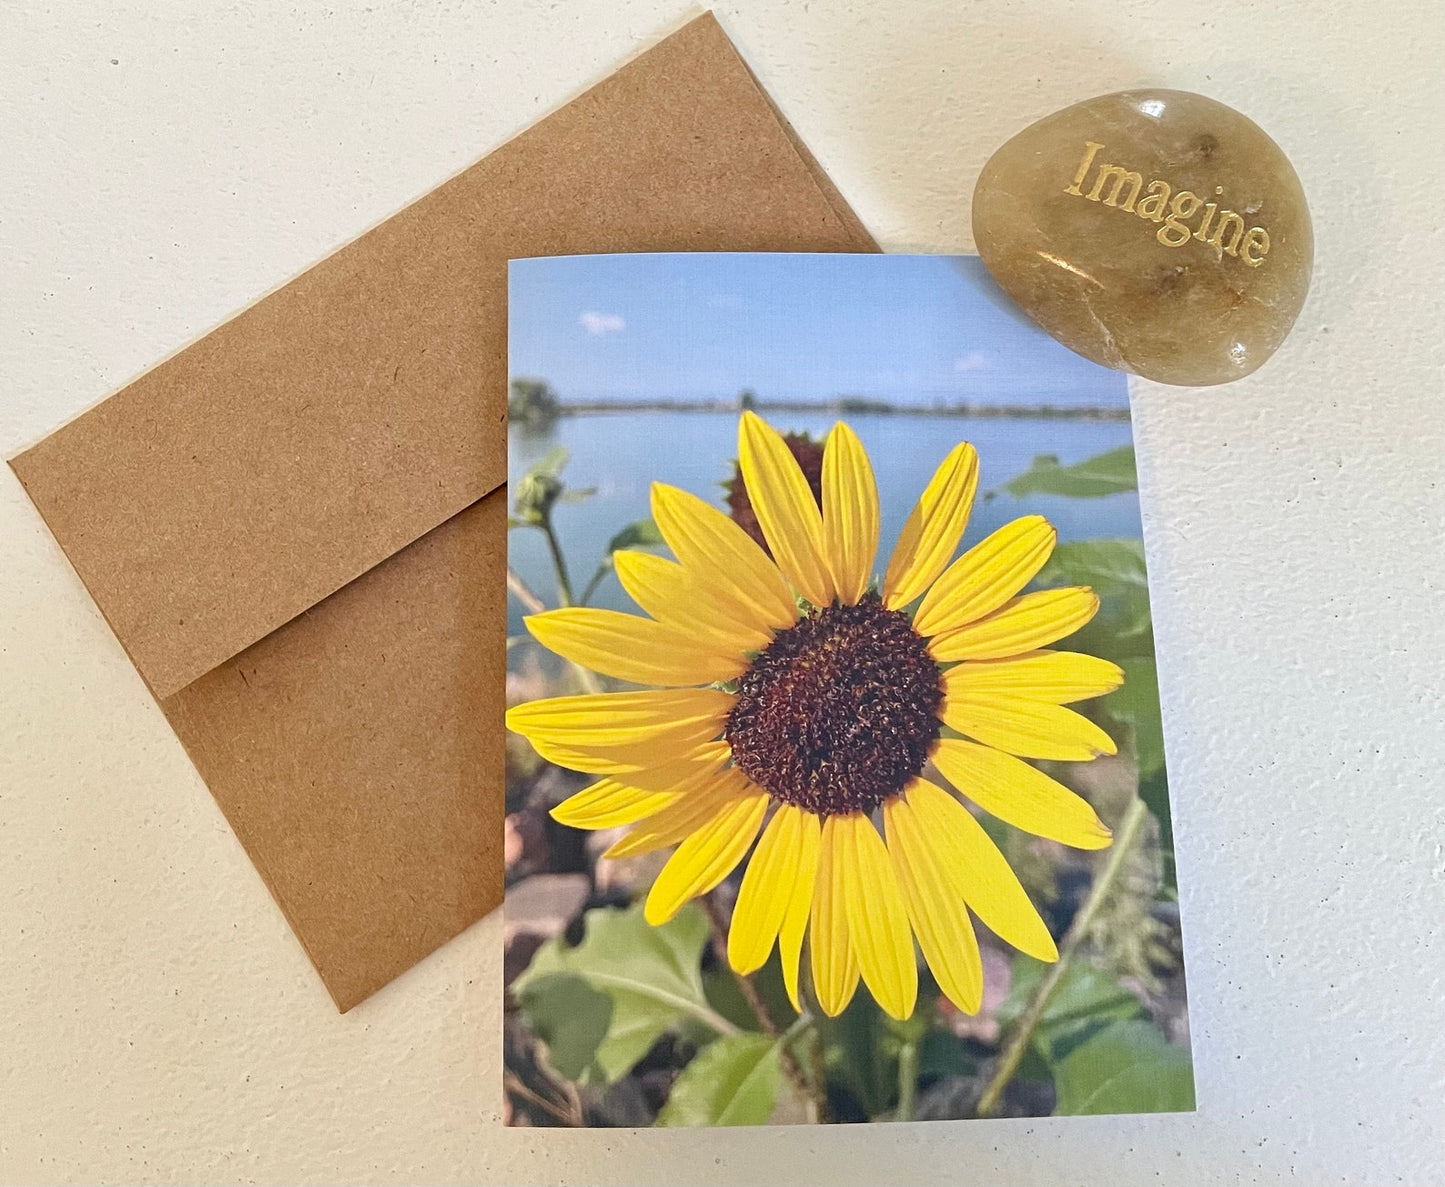 Windy Sunflower Photography Greeting Card With Kraft Envelope